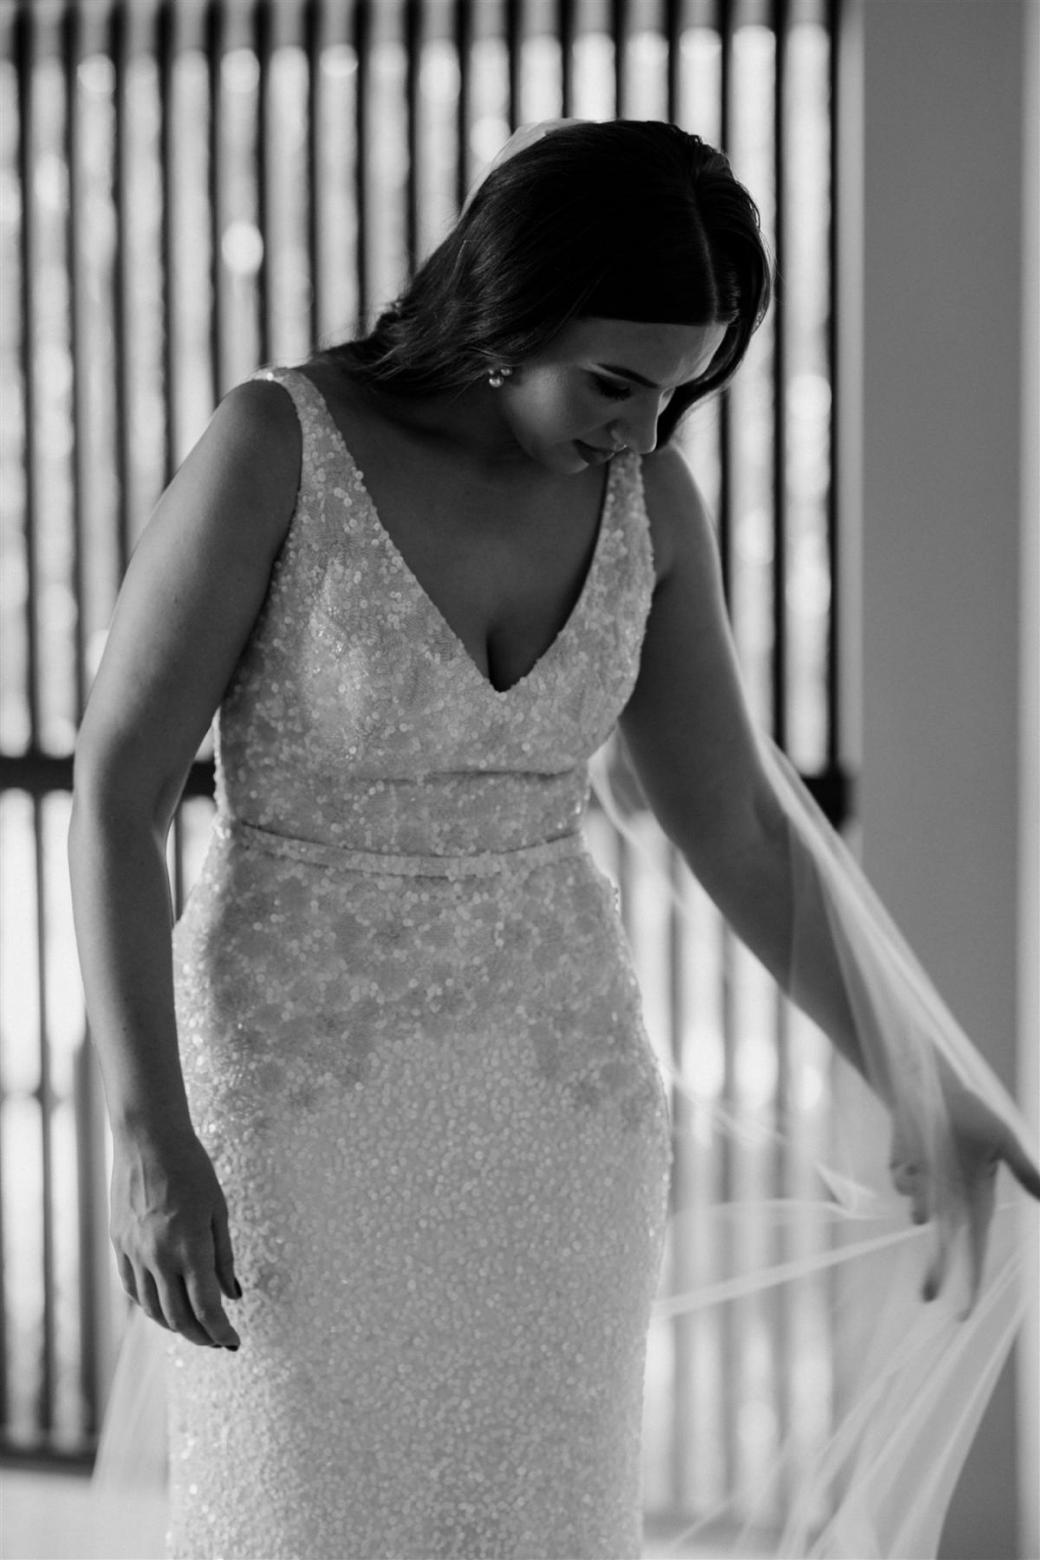 KWH bride Jemma getting ready wearing GEORGINA wedding dress; a beaded dress with a designed fit and flare